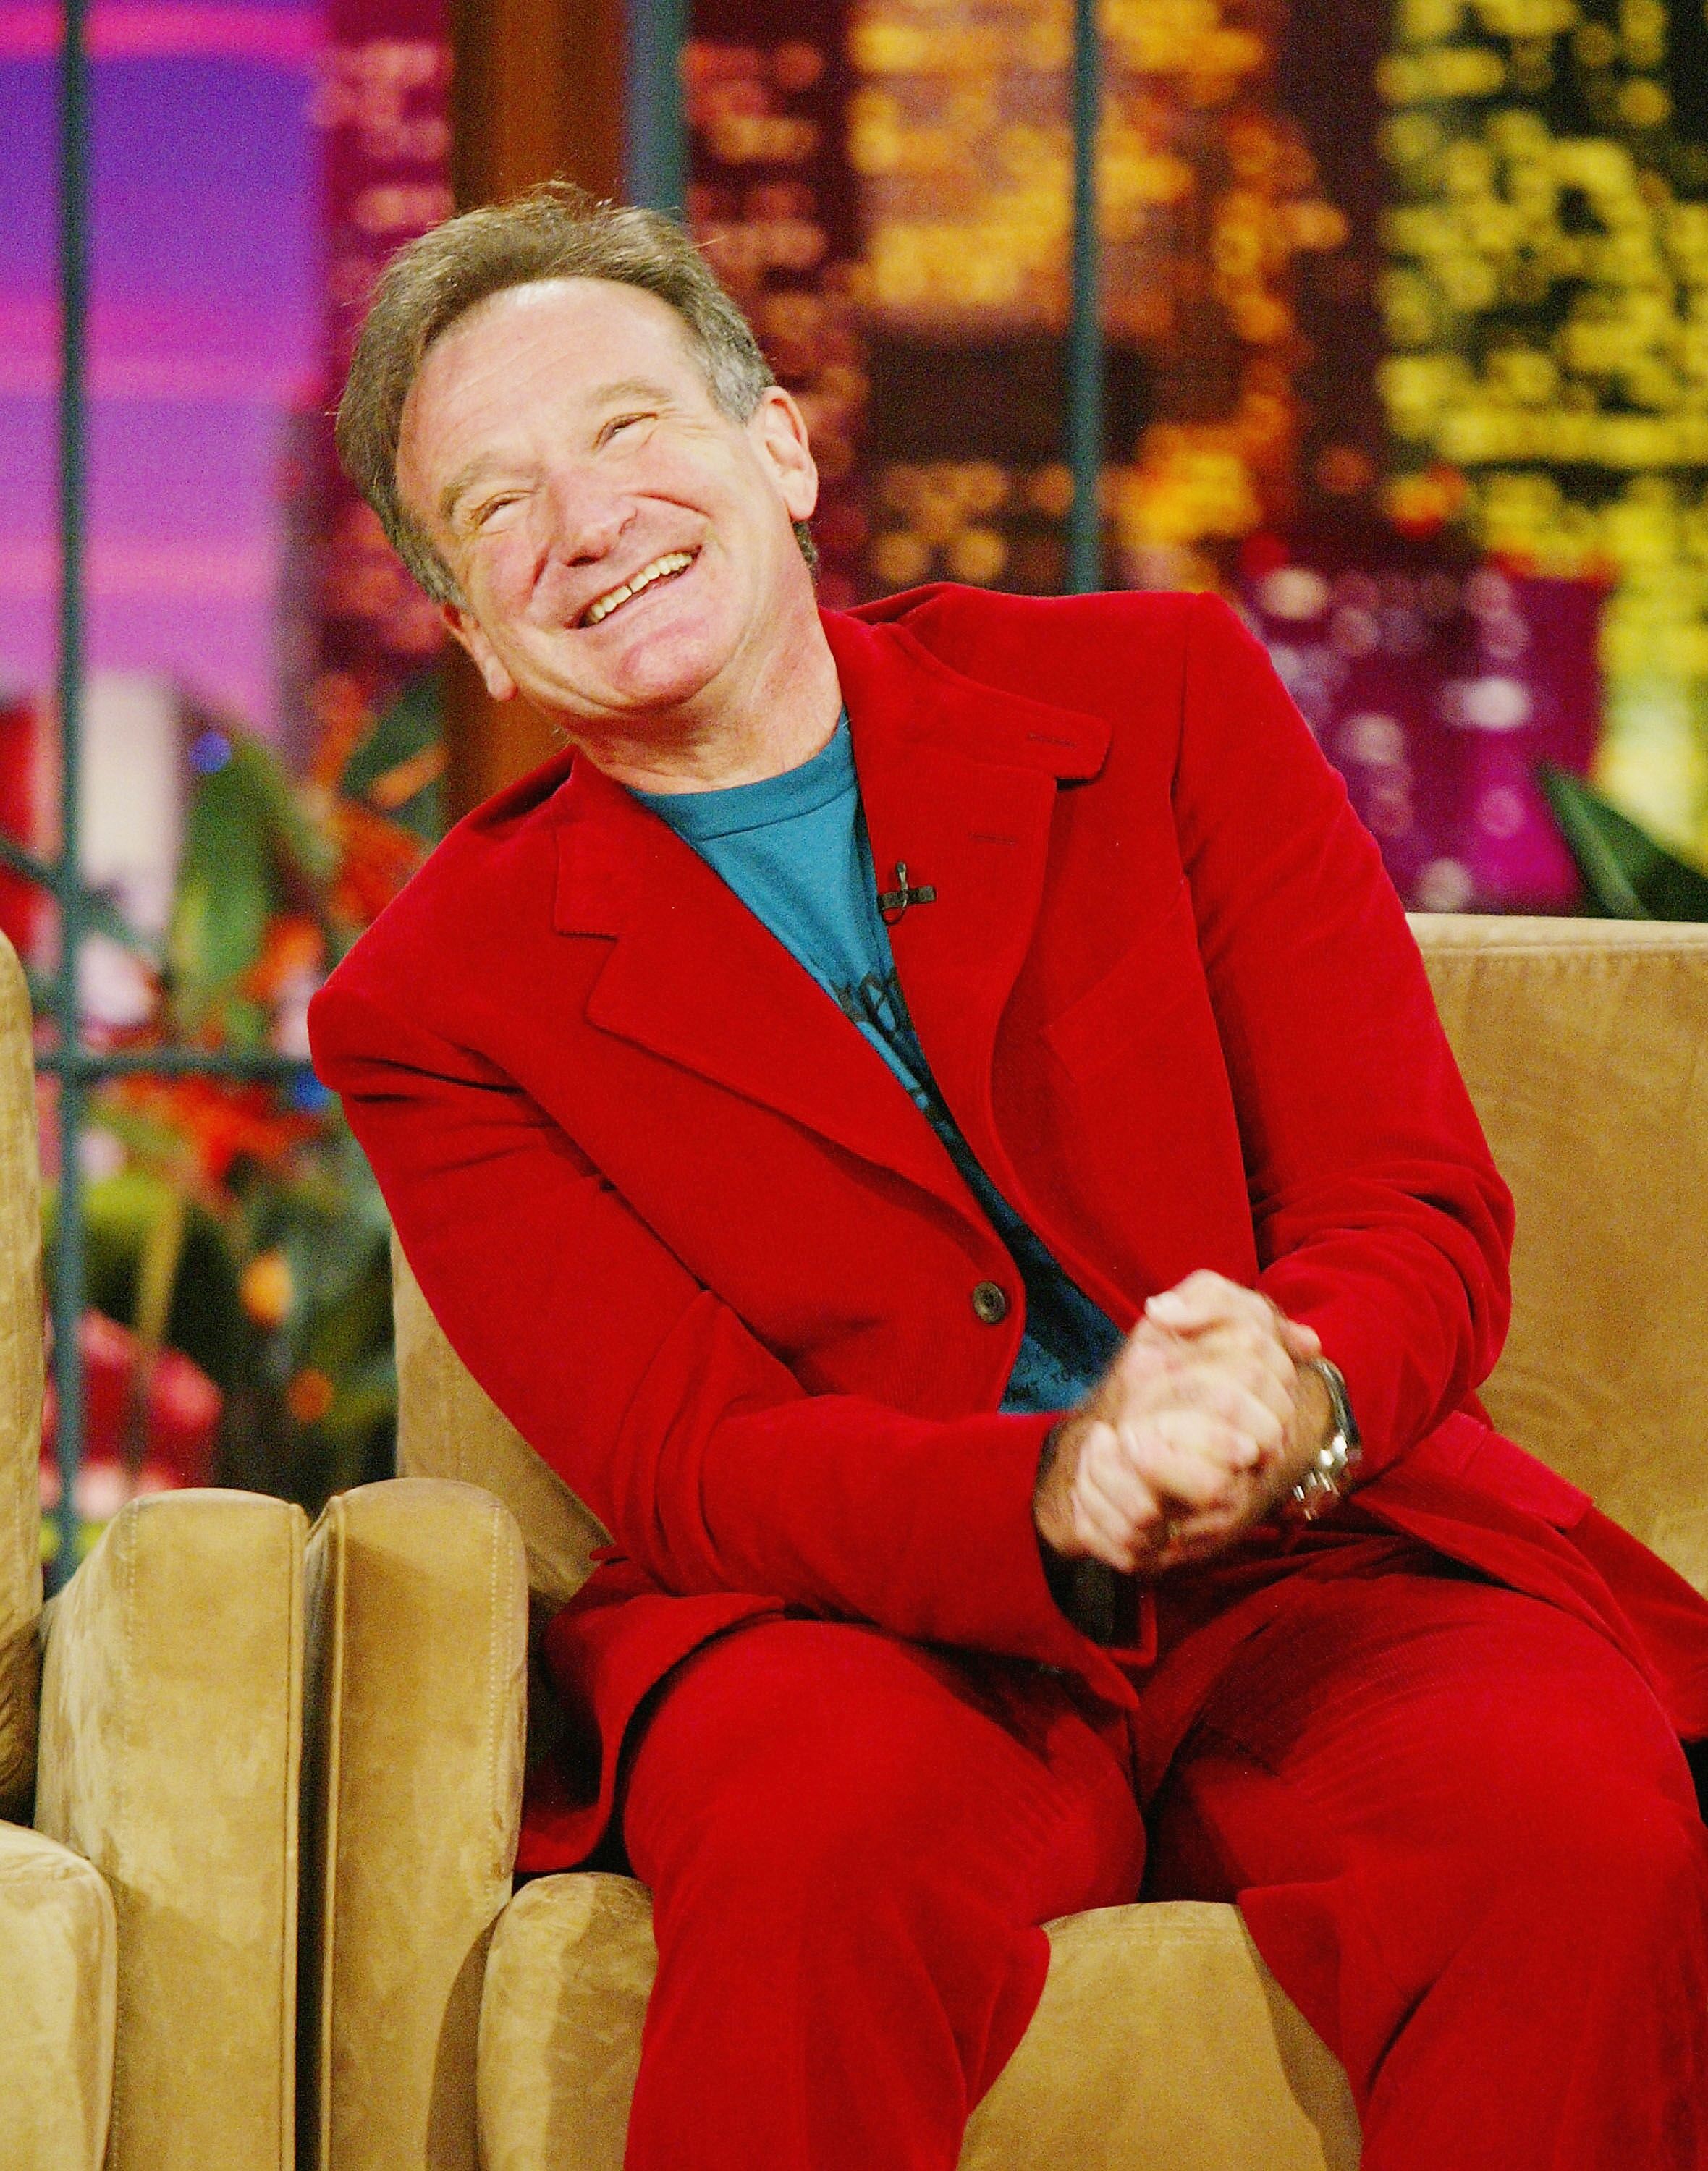 Robin Williams on "The Tonight Show wish Jay Leno." | Source: Getty Images